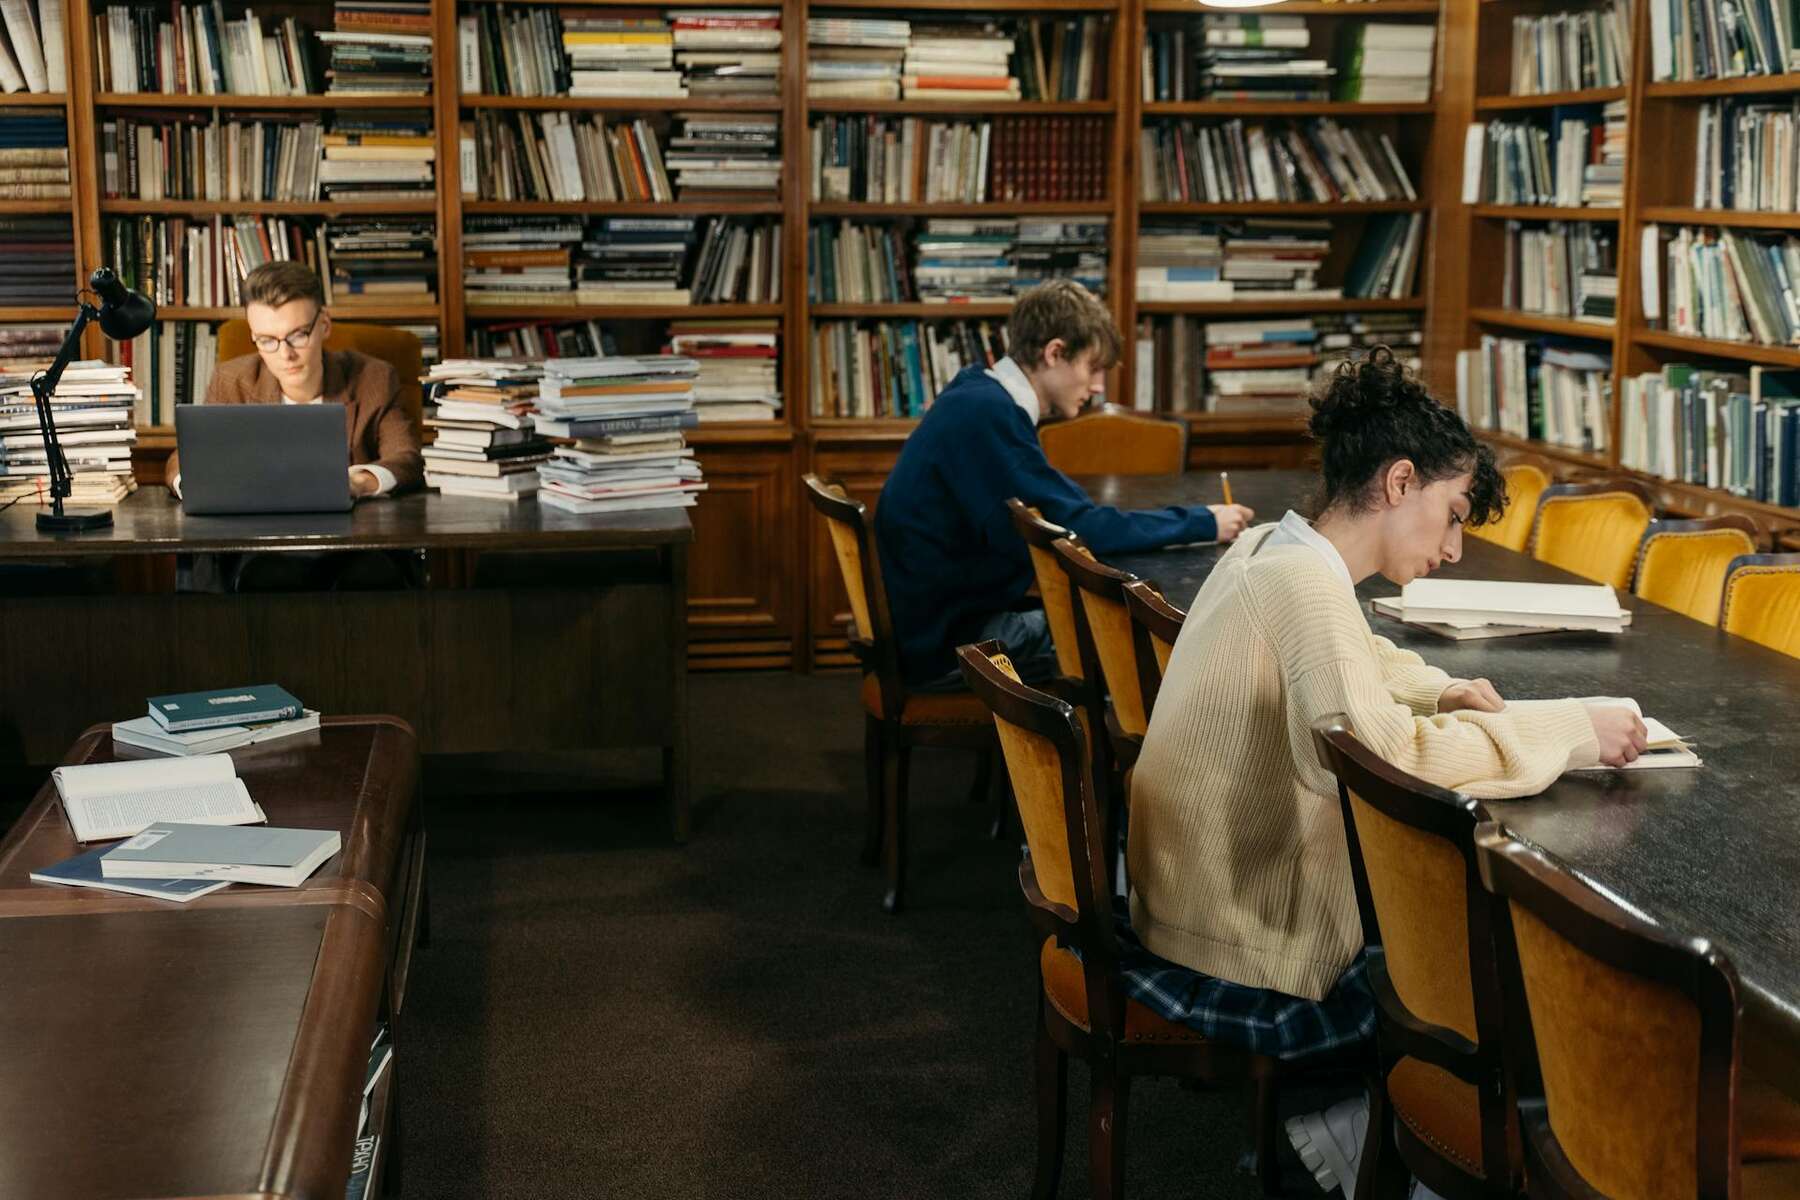 A diverse group of people sitting at tables in a library, engrossed in books and studying together